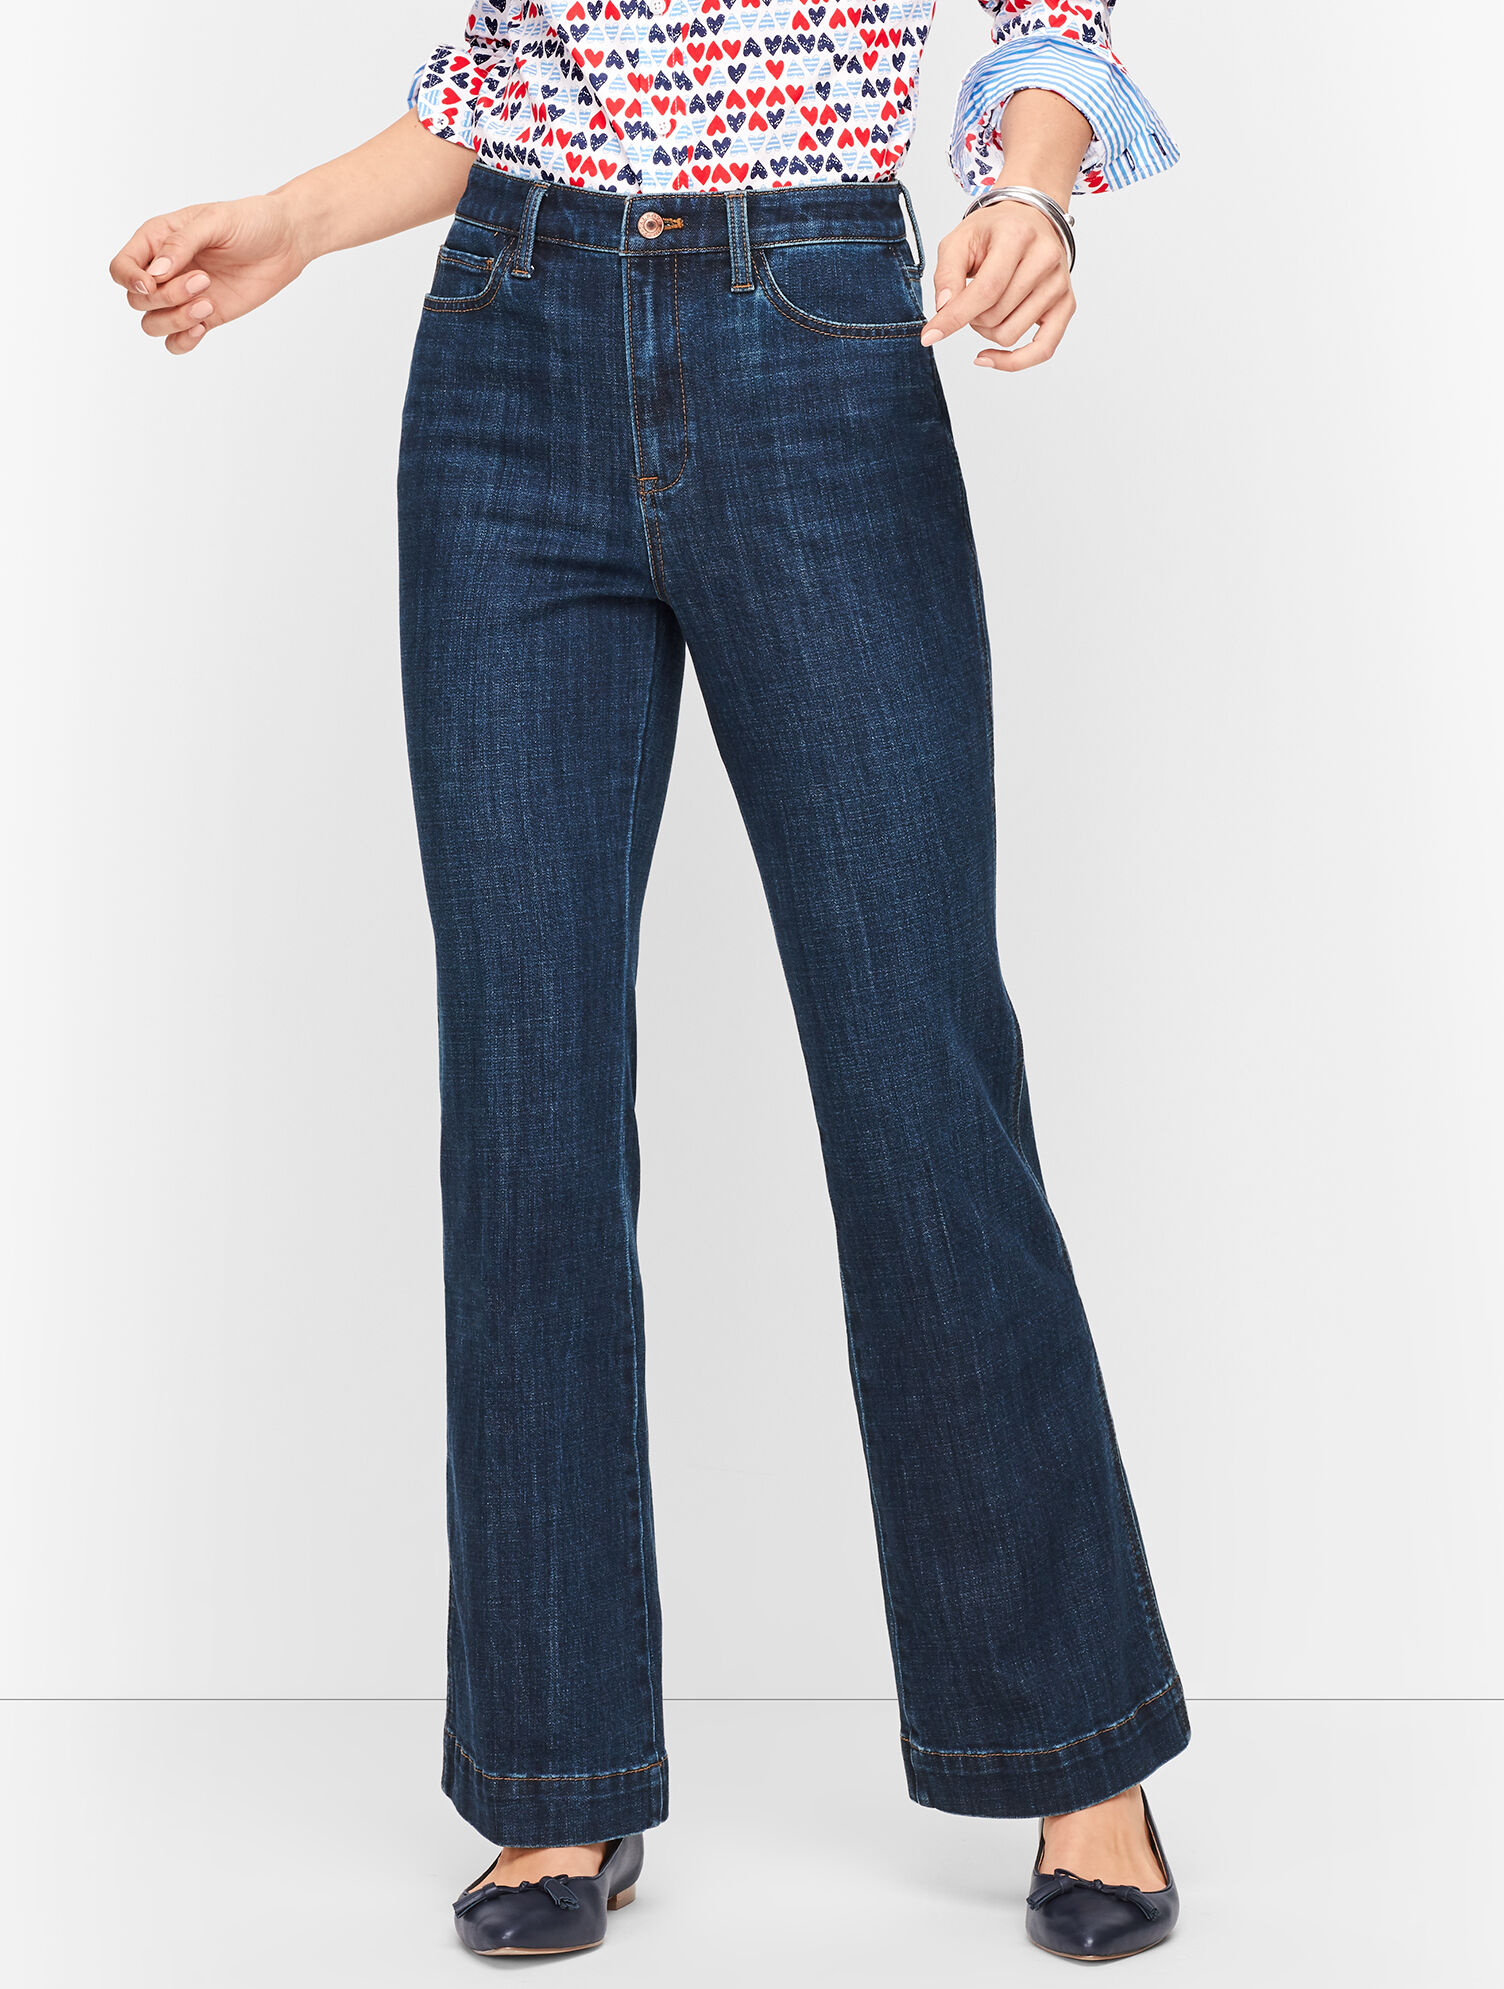 Blake Slim Flared Jeans With High Rise - Rinse Blue